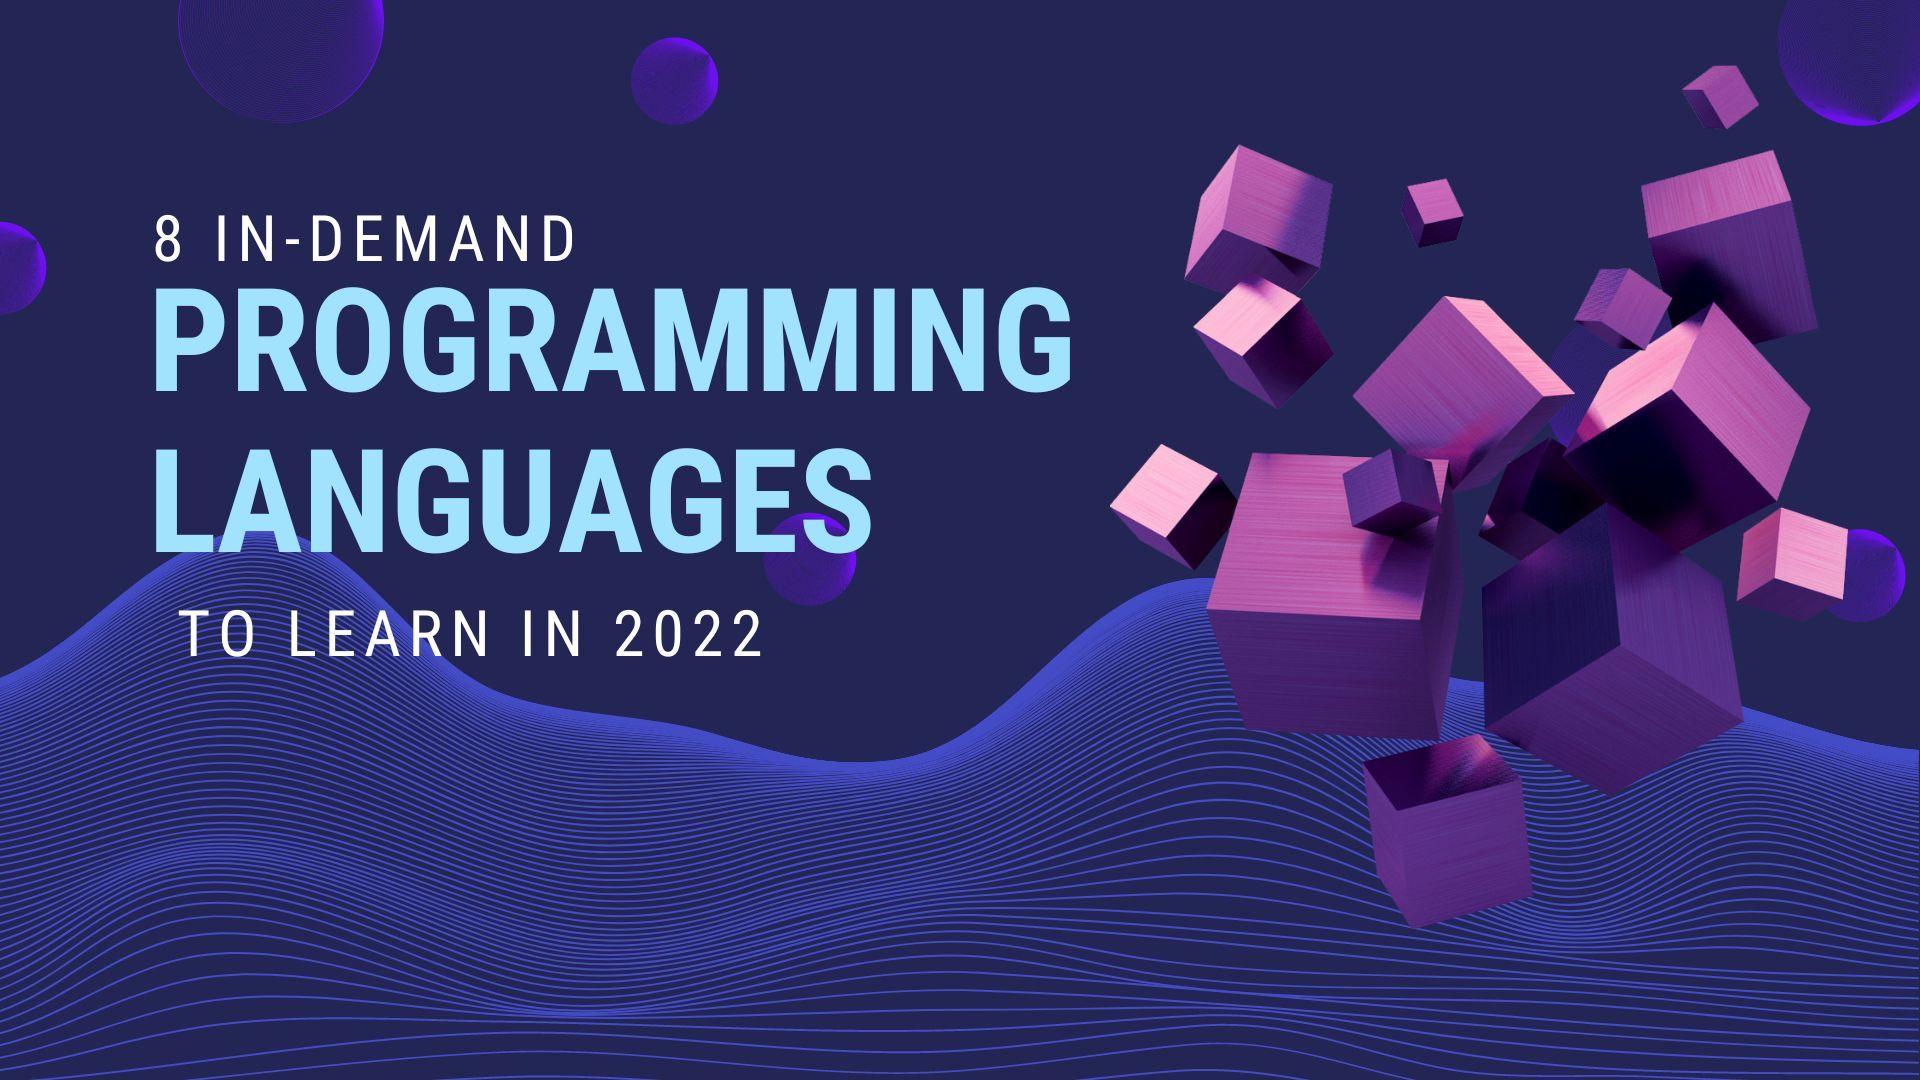 8 In-Demand Programming Languages to Learn in 2022